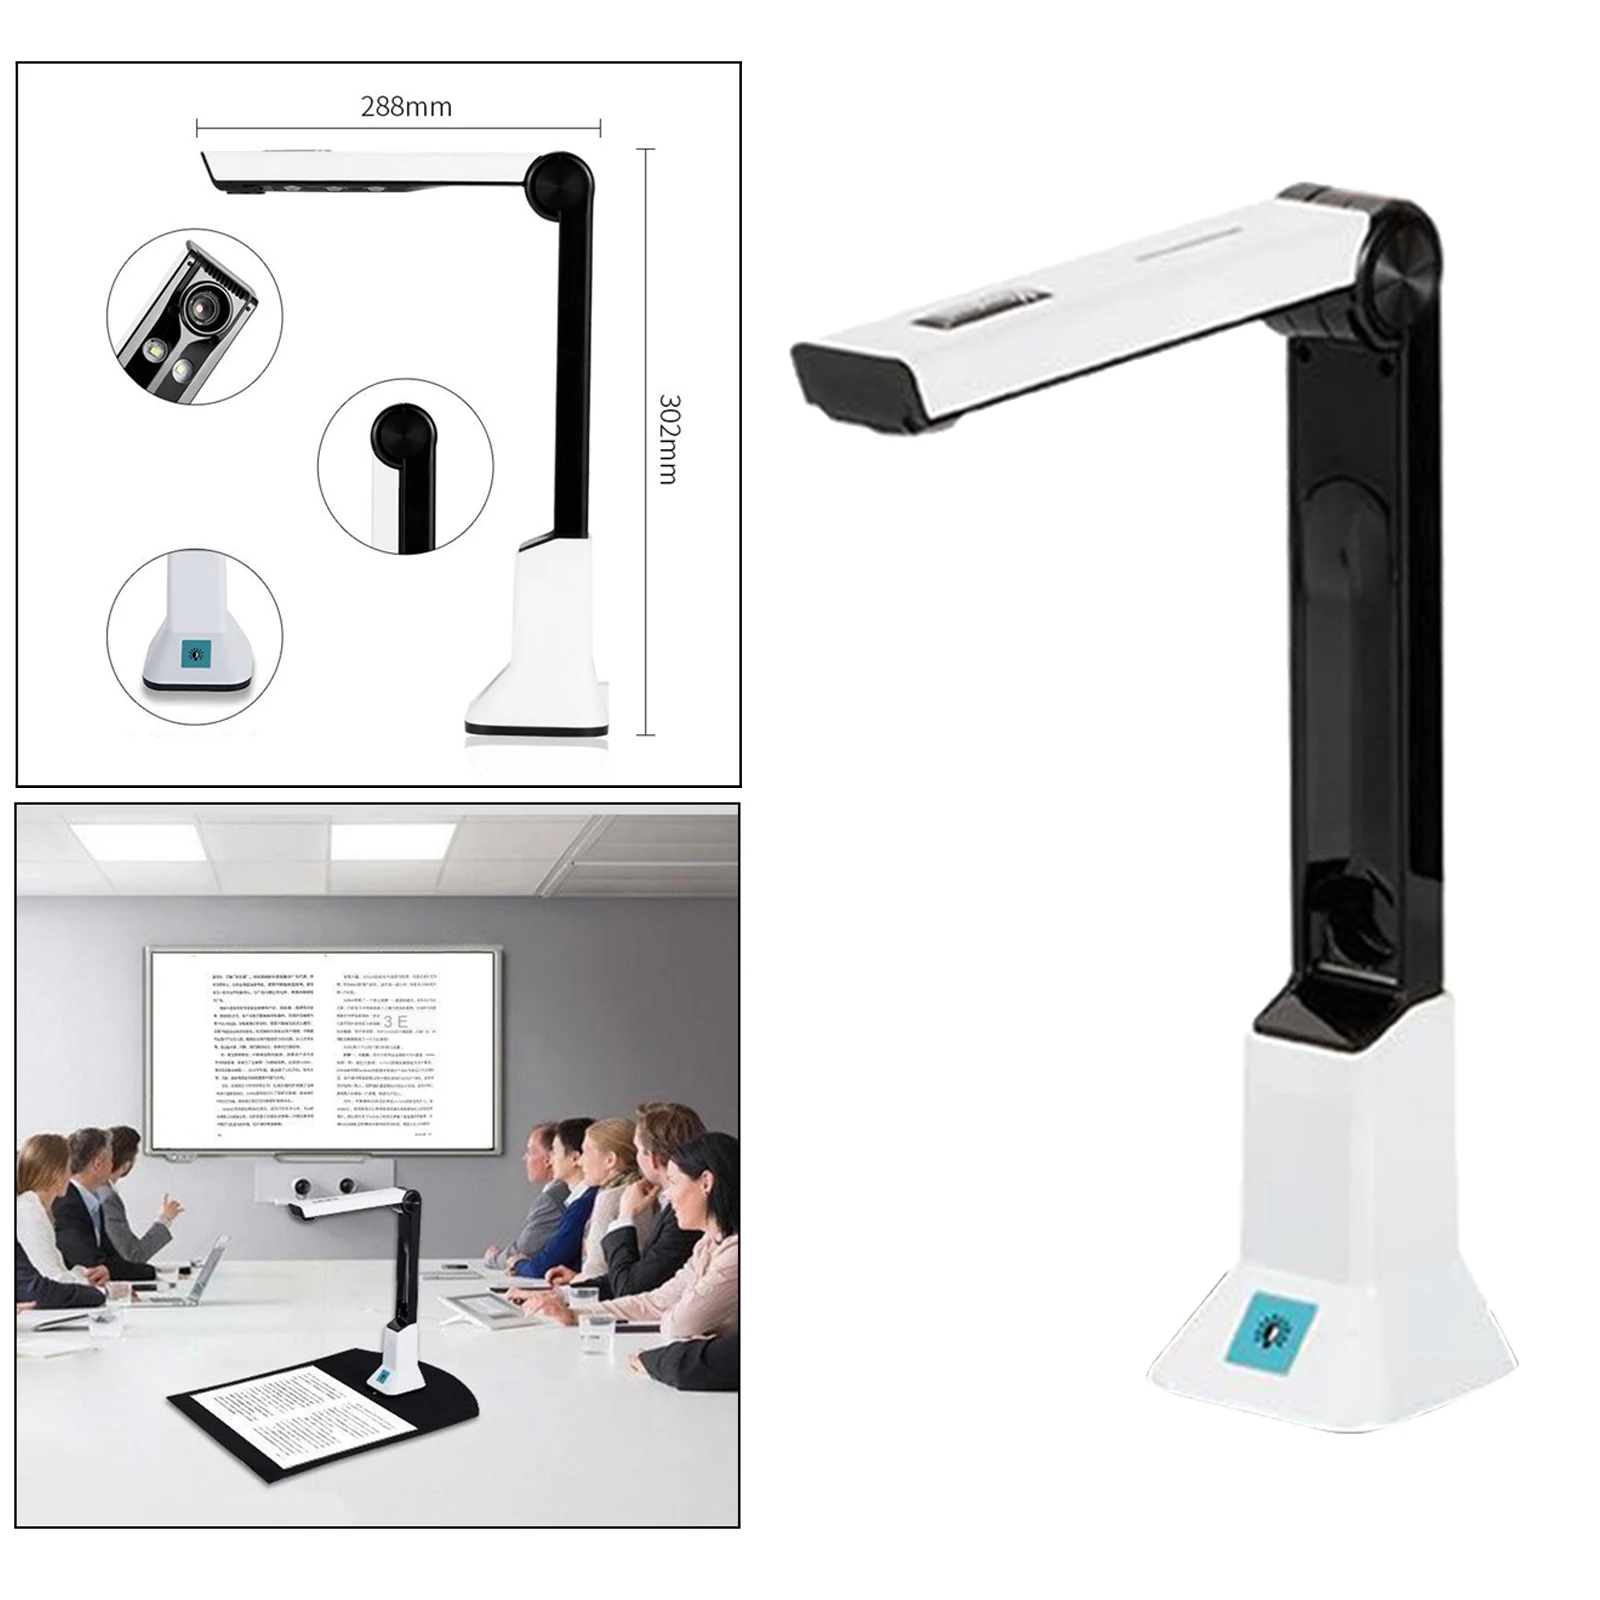 8MP USB Document Camera A4 Format Scanner with OCR for Education Training,Real-time Projection